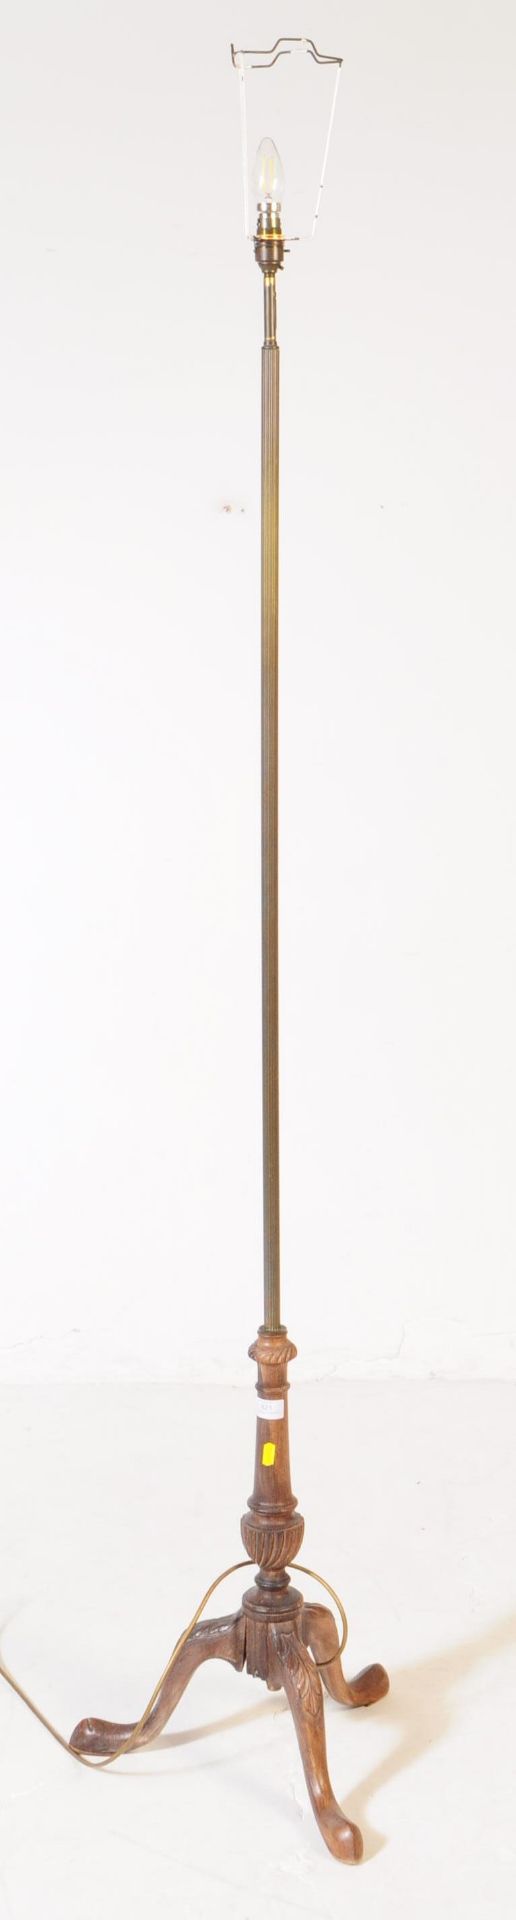 EARLY 20TH CENTURY BRASS & WOOD FLOOR STANDING LAMP